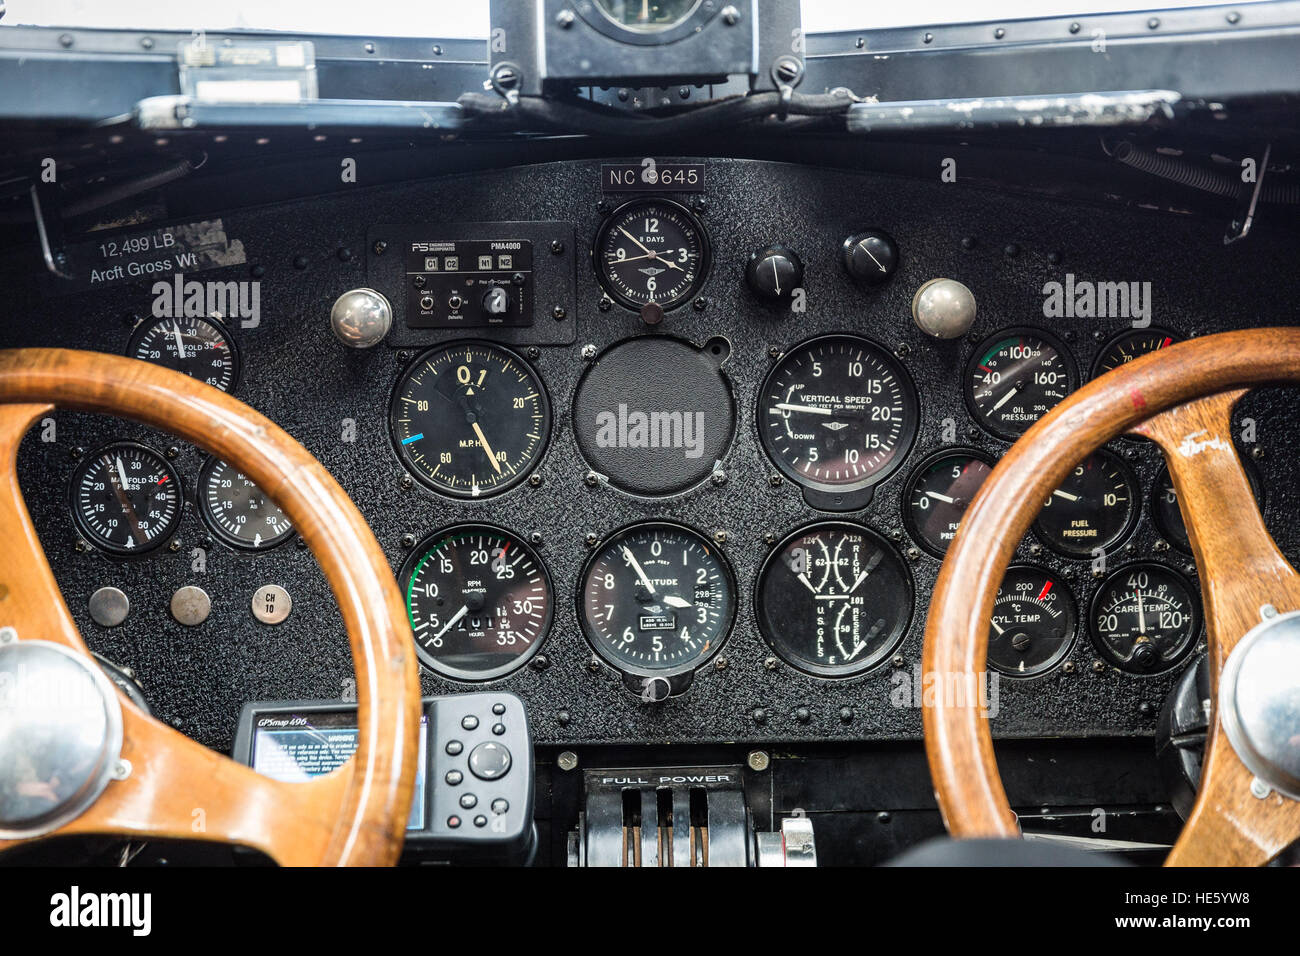 Groveland, California, USA. 16th Dec, 2016. Friday, December 16, 2016.The cockpit of a 1928 Ford Tri-Motor airplane. Volunteers from the Experimental Aircraft Association (EAA) are coordinating Tri-Motor flights from the Pine Mountain Lake (PML) airport, Groveland, California. This Ford Tri-Motor NC9645, nicknamed The Tin Goose, has a wingspan of 77 feet 6 inches and was constructed in 1928. It was named the City of Wichita, and it was used to introduce the first coast-to-coast passenger air/rail service in the United States on July 7, 1929, and the development and inauguration of the f Stock Photo